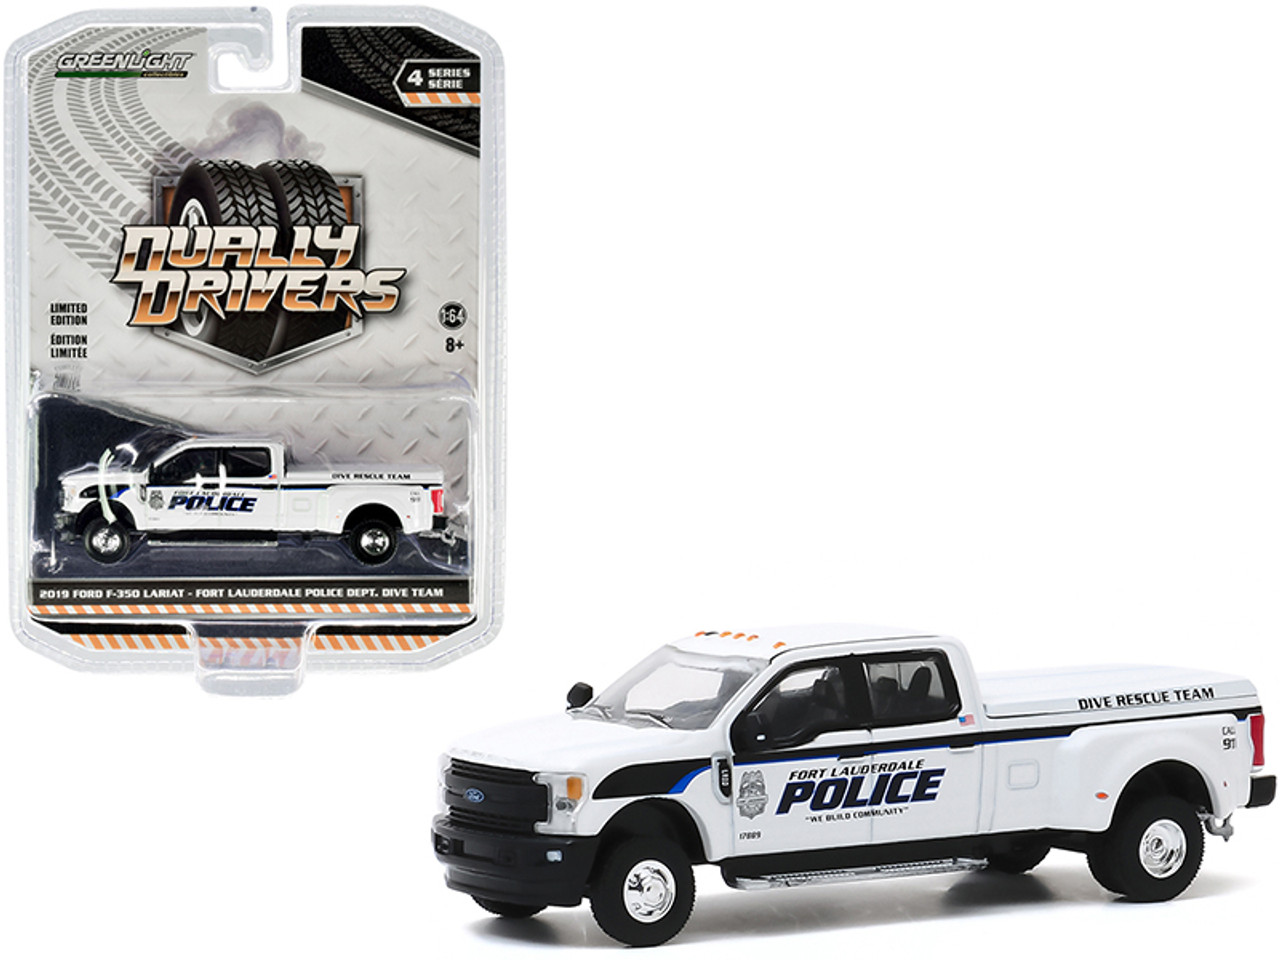 2019 Ford F-350 Lariat Dually Pickup Truck White "Fort Lauderdale Police Department" Dive Rescue Team (Florida) "Dually Drivers" Series 4 1/64 Diecast Model Car by Greenlight